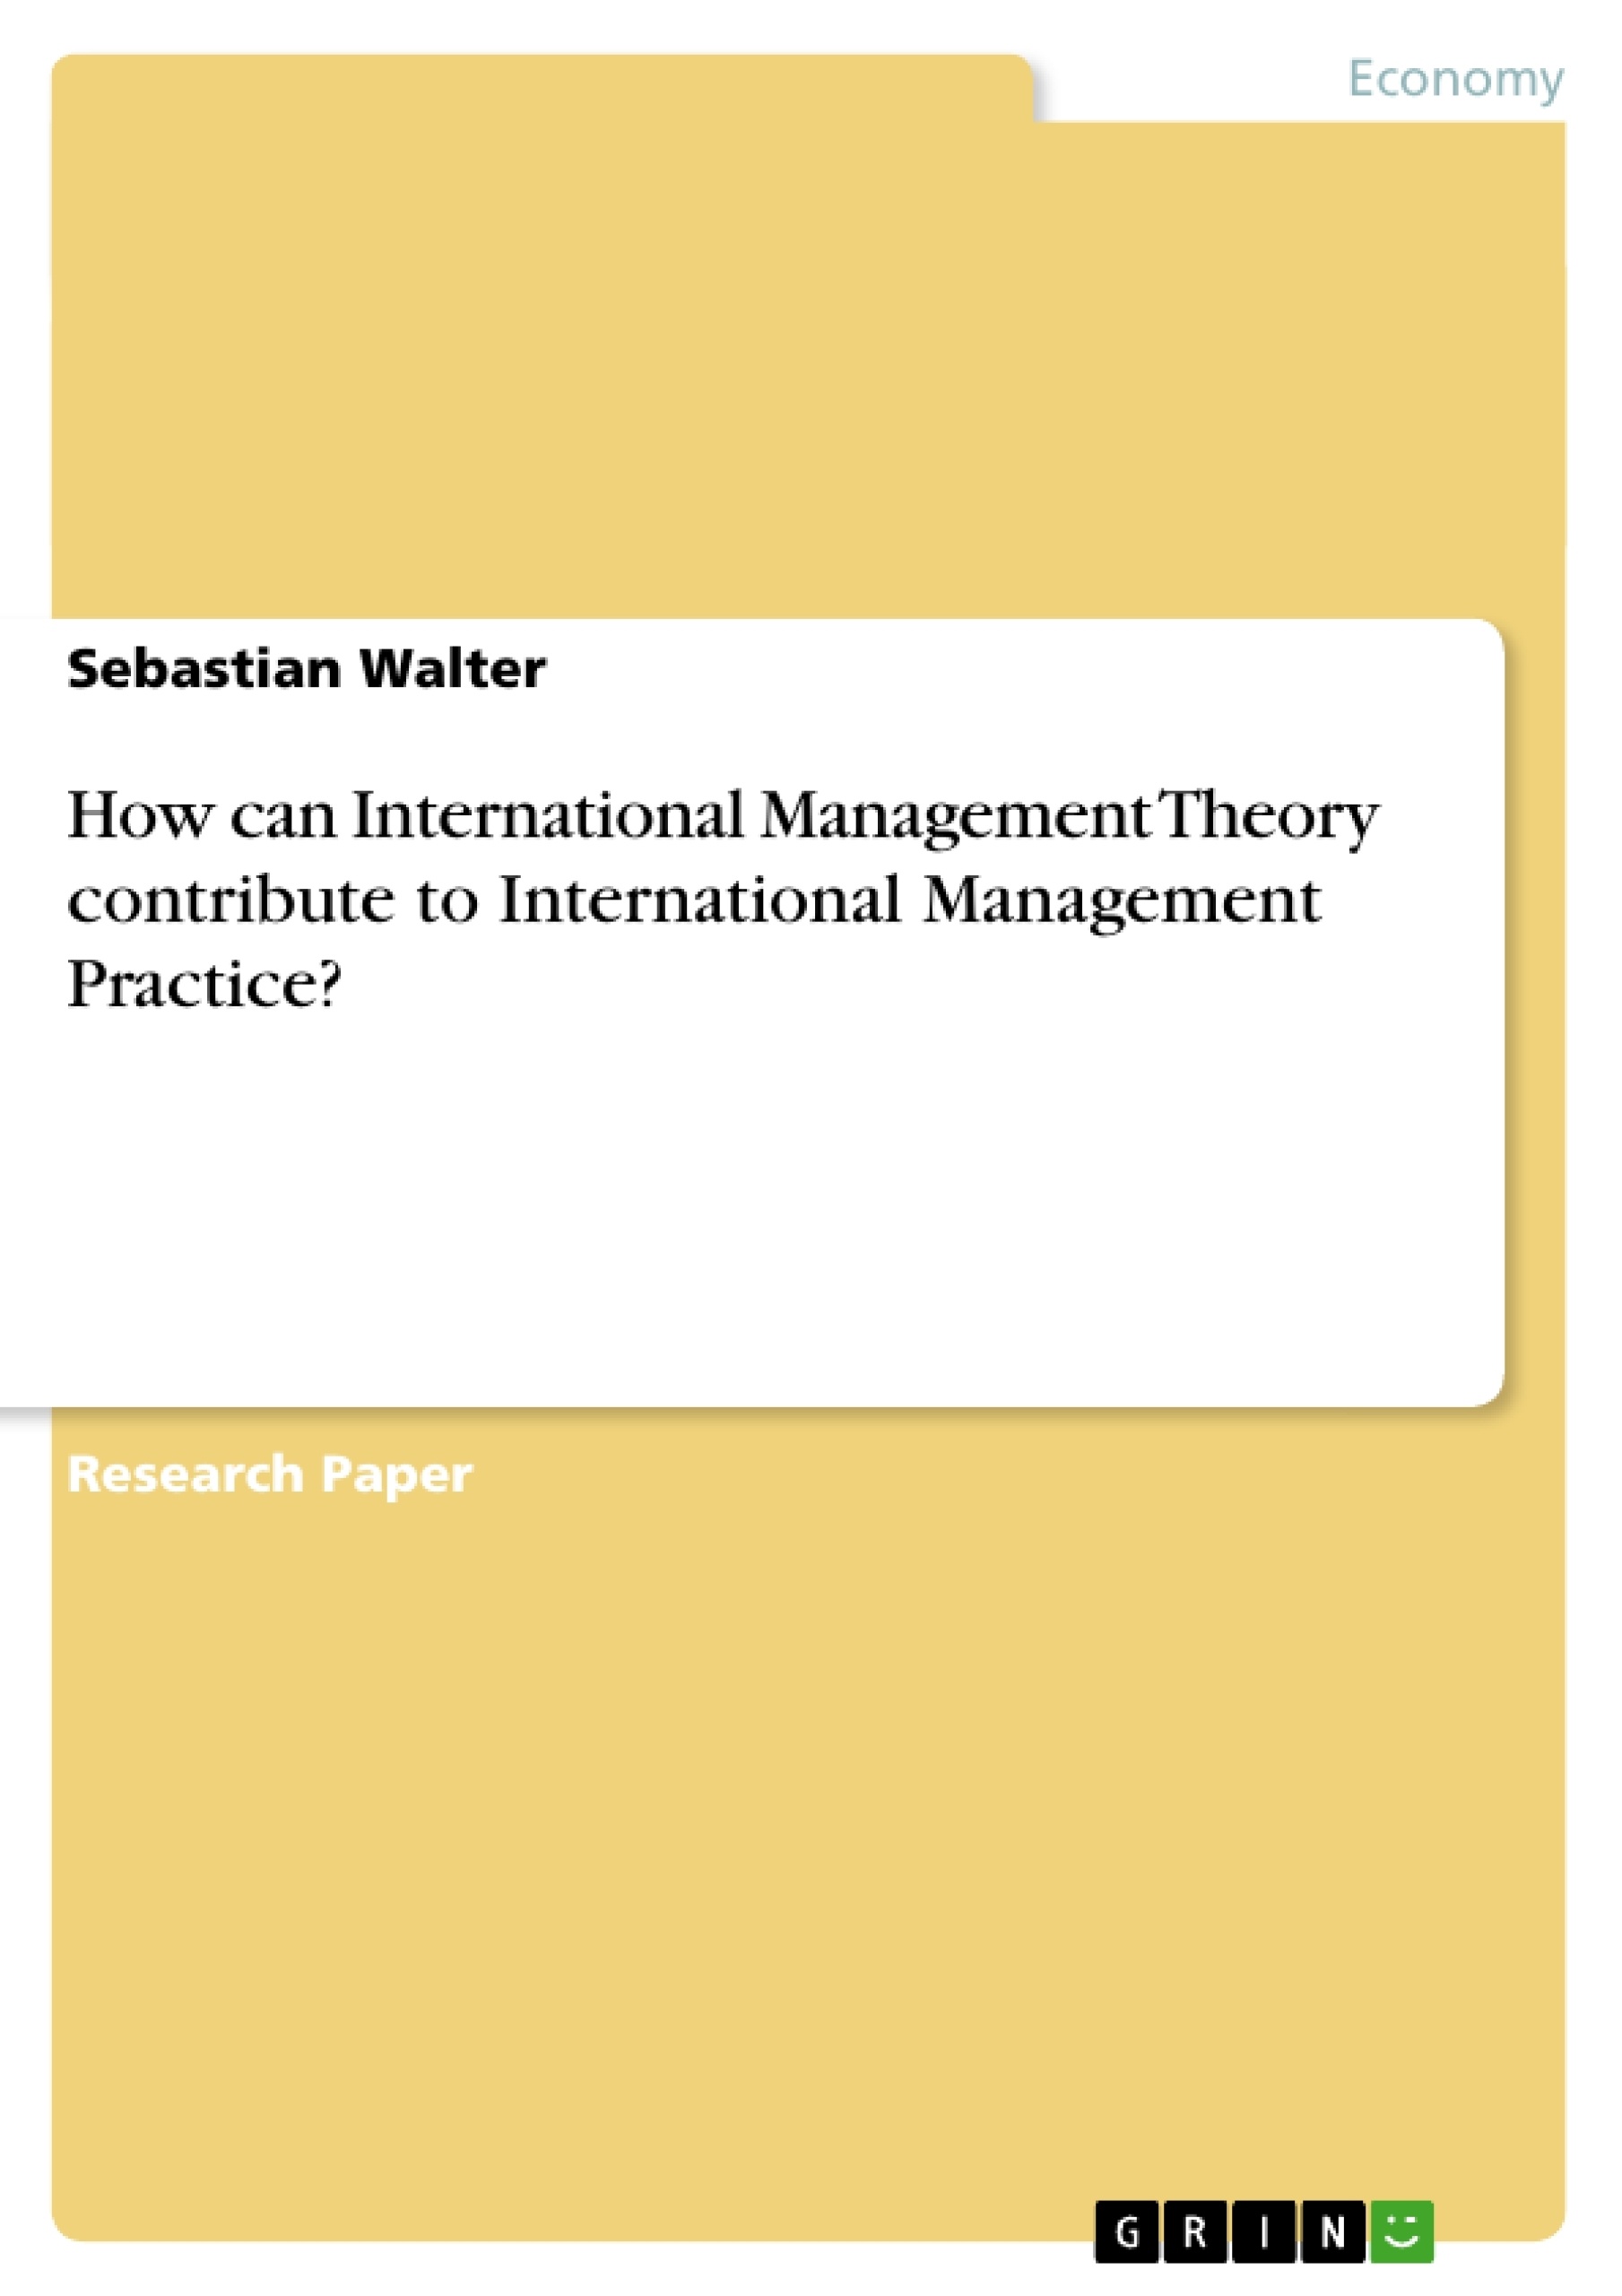 Title: How can International Management Theory contribute to International Management Practice?